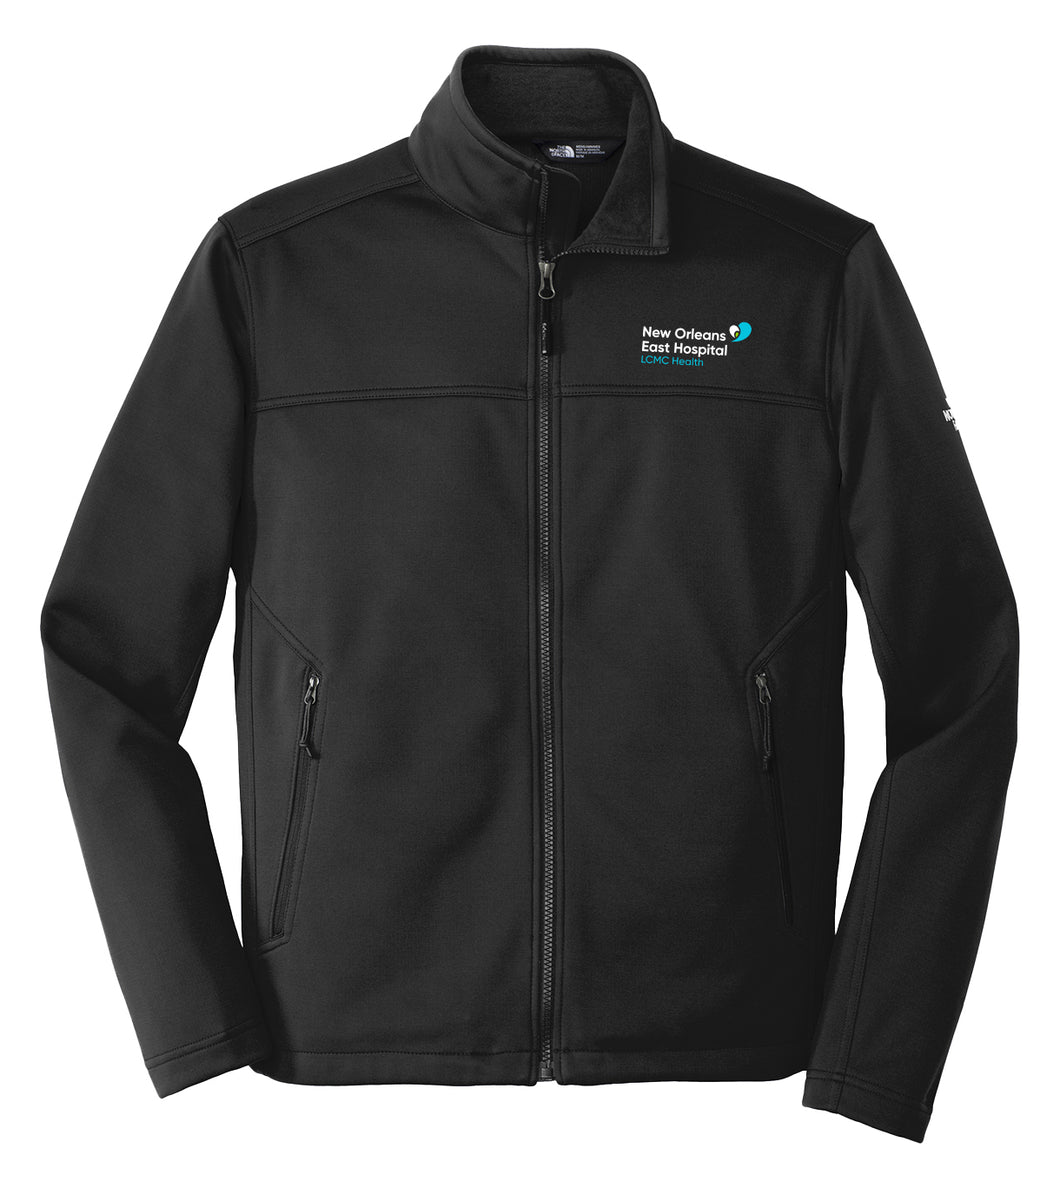 New Orleans East Hospital Personal Item The North Face® Ridgewall Soft Shell Jacketwith Embroidered Logo